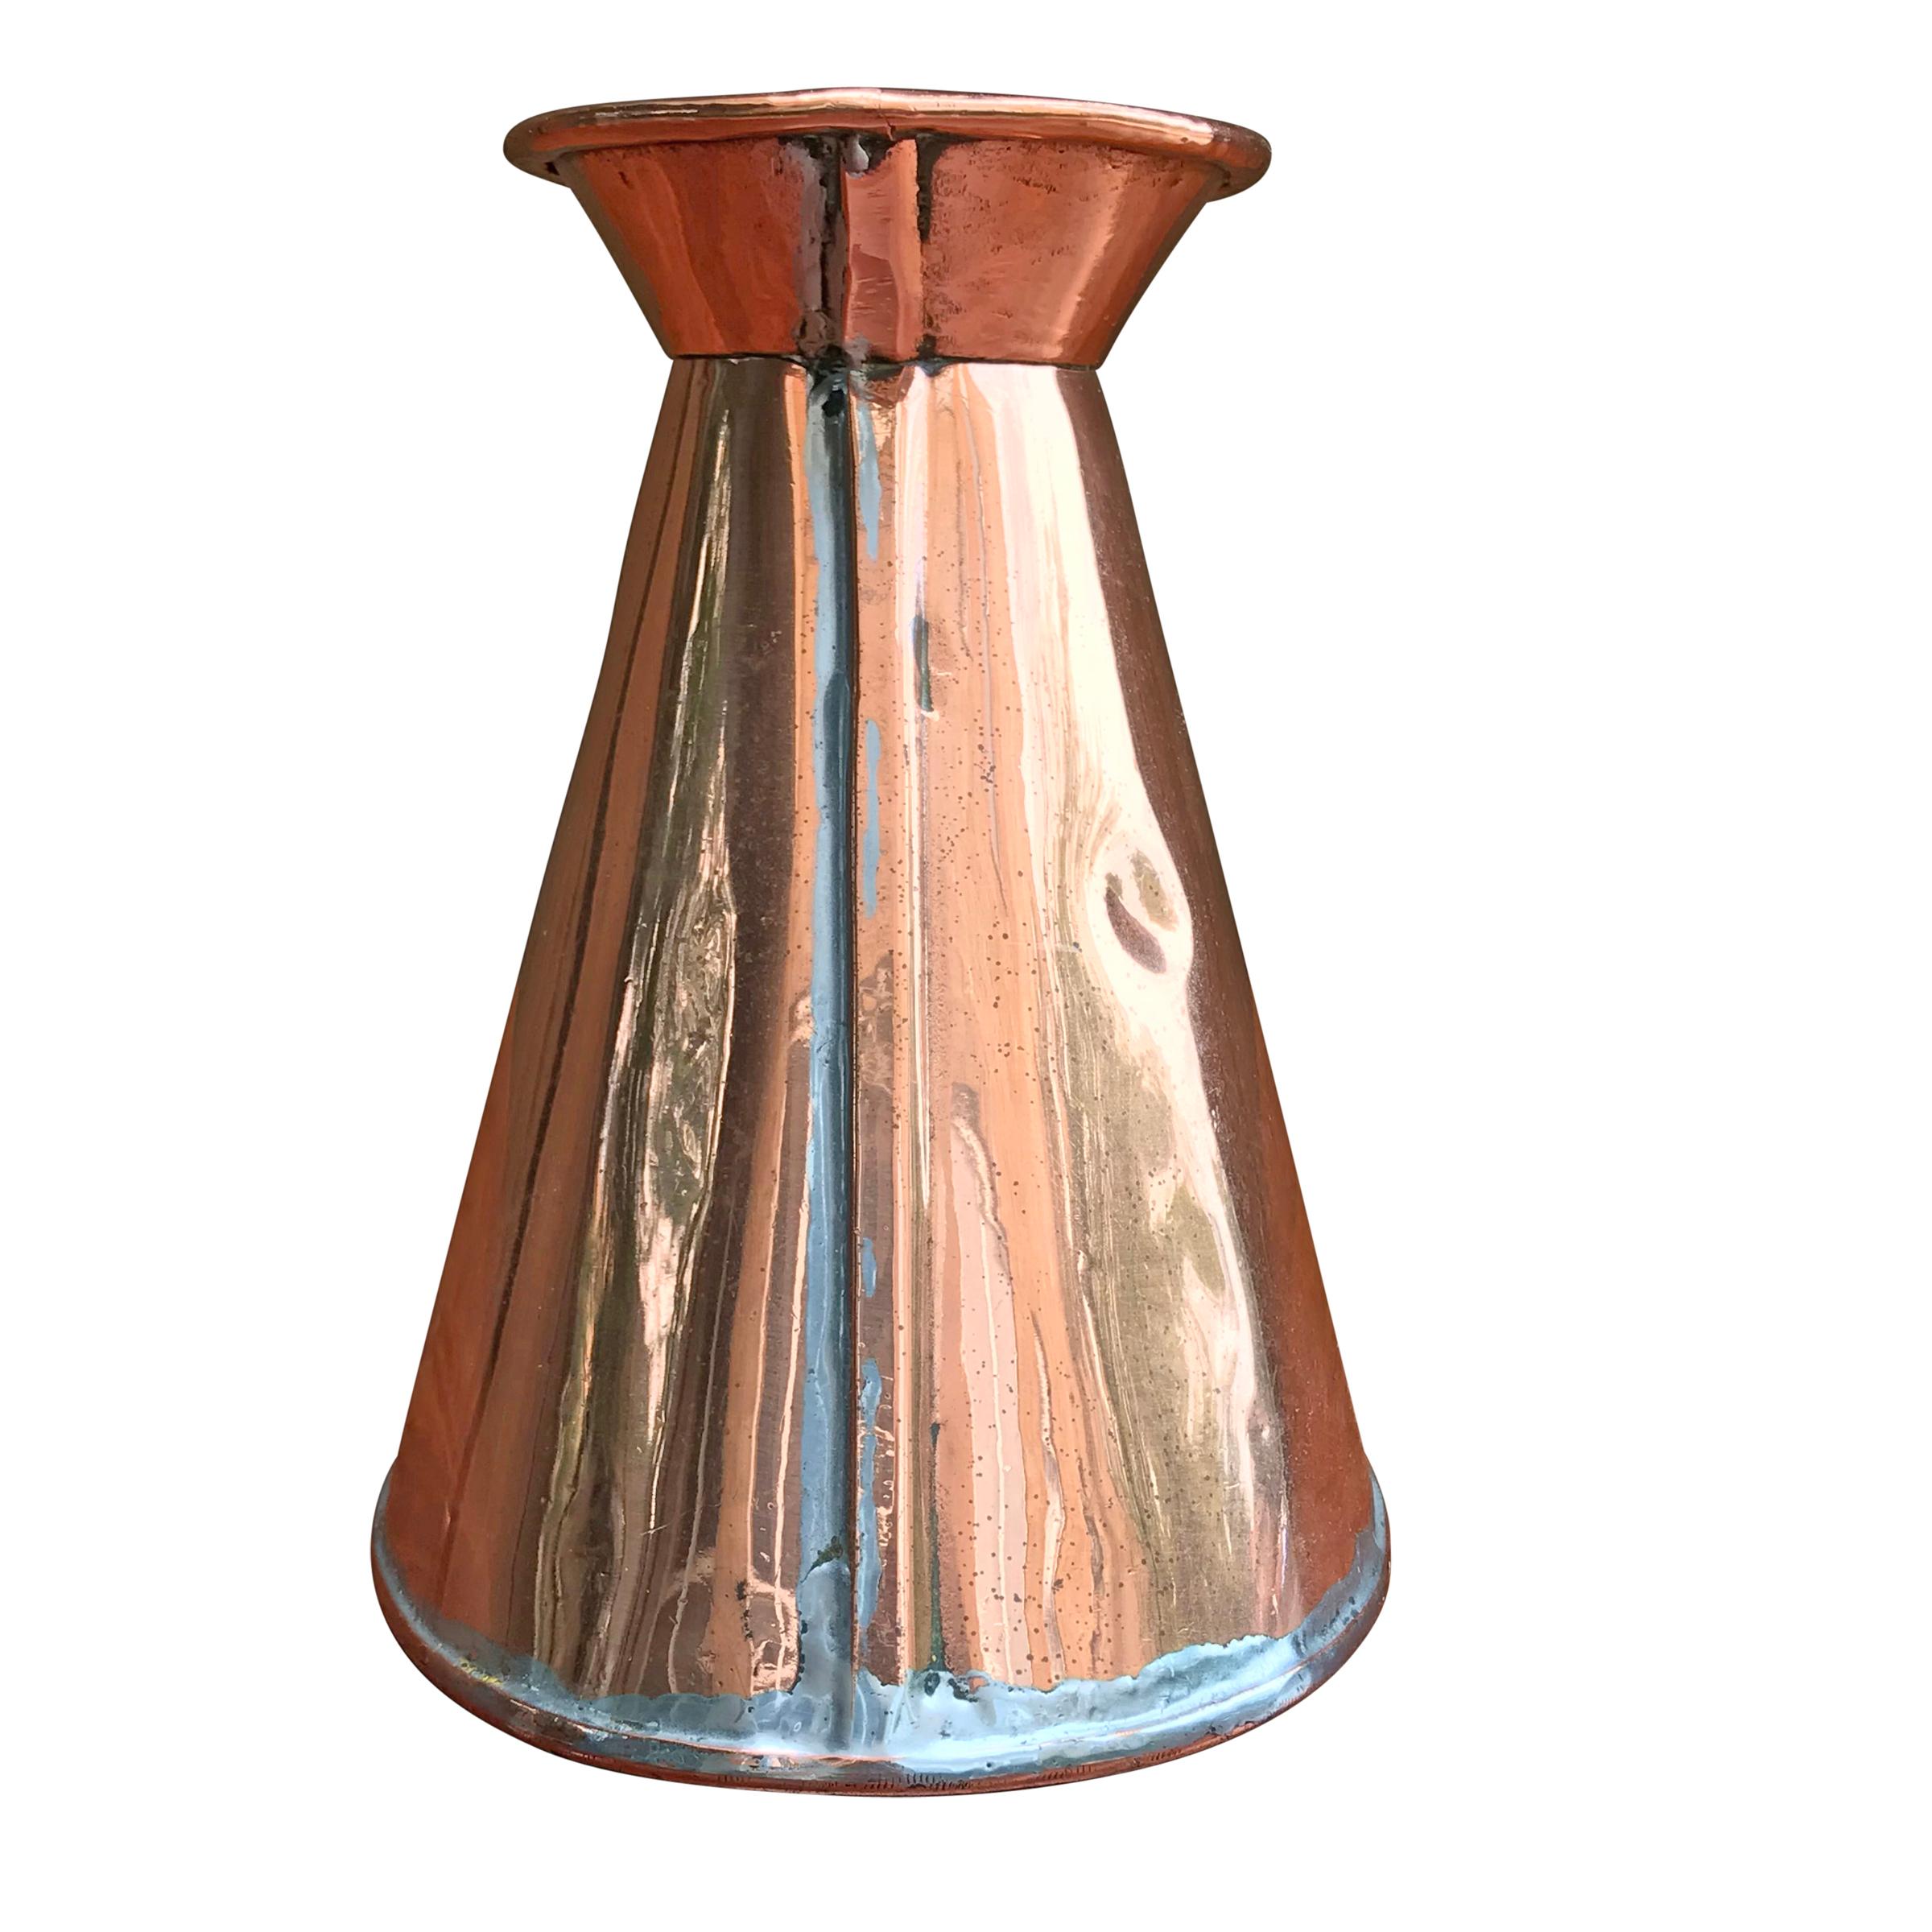 British Early 19th Century English Copper Pitcher